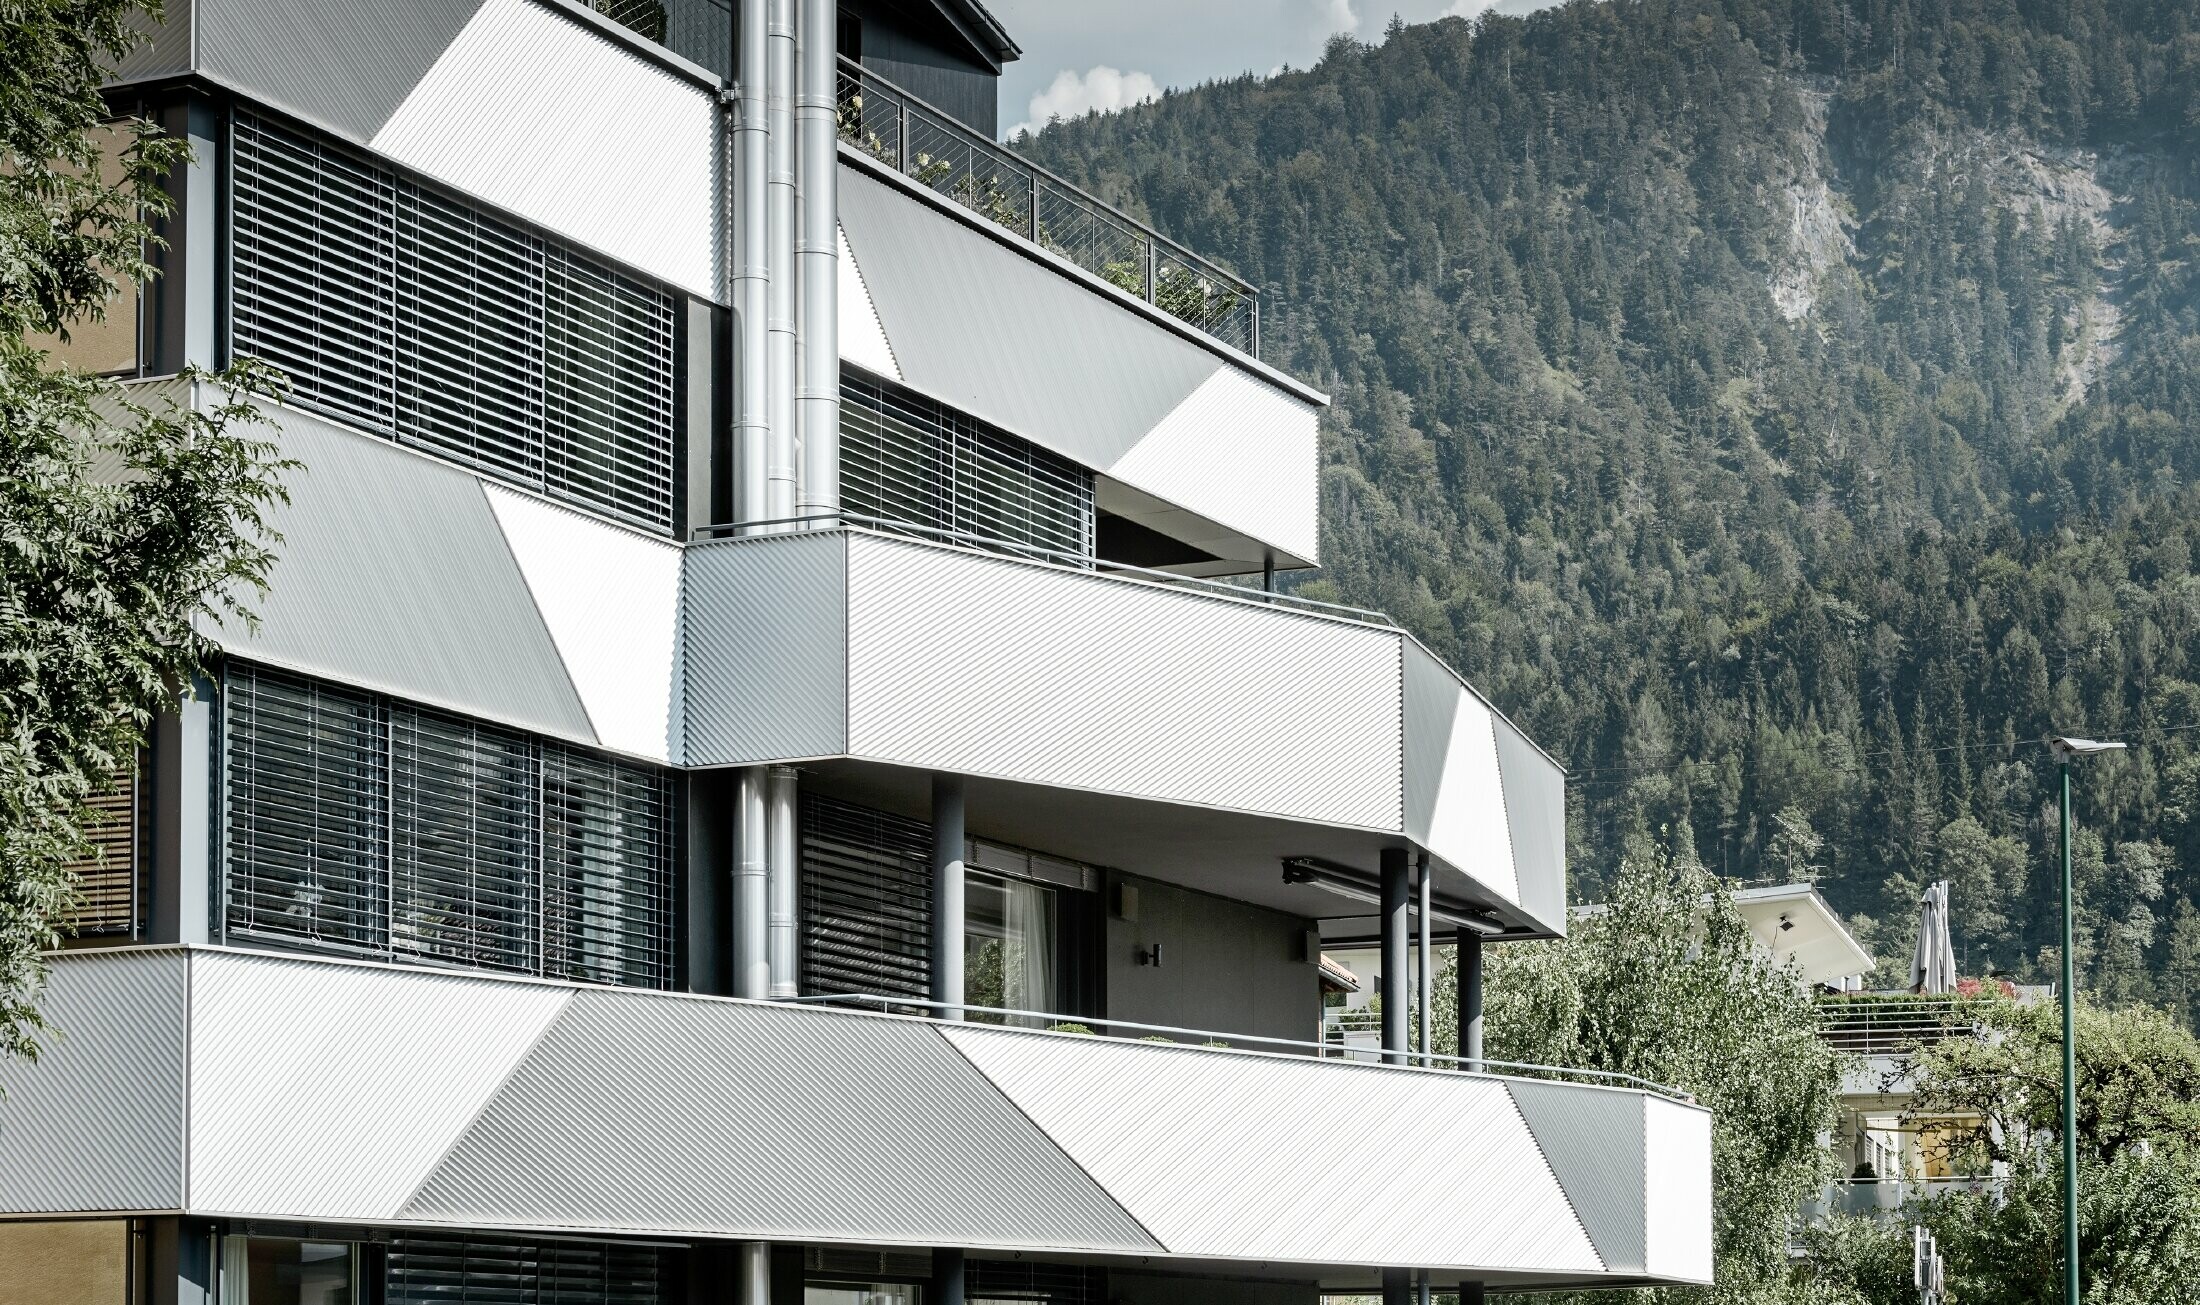 Façade design of an apartment building with balconies and loggia with the PREFA zig-zag profile with diagonal installation.